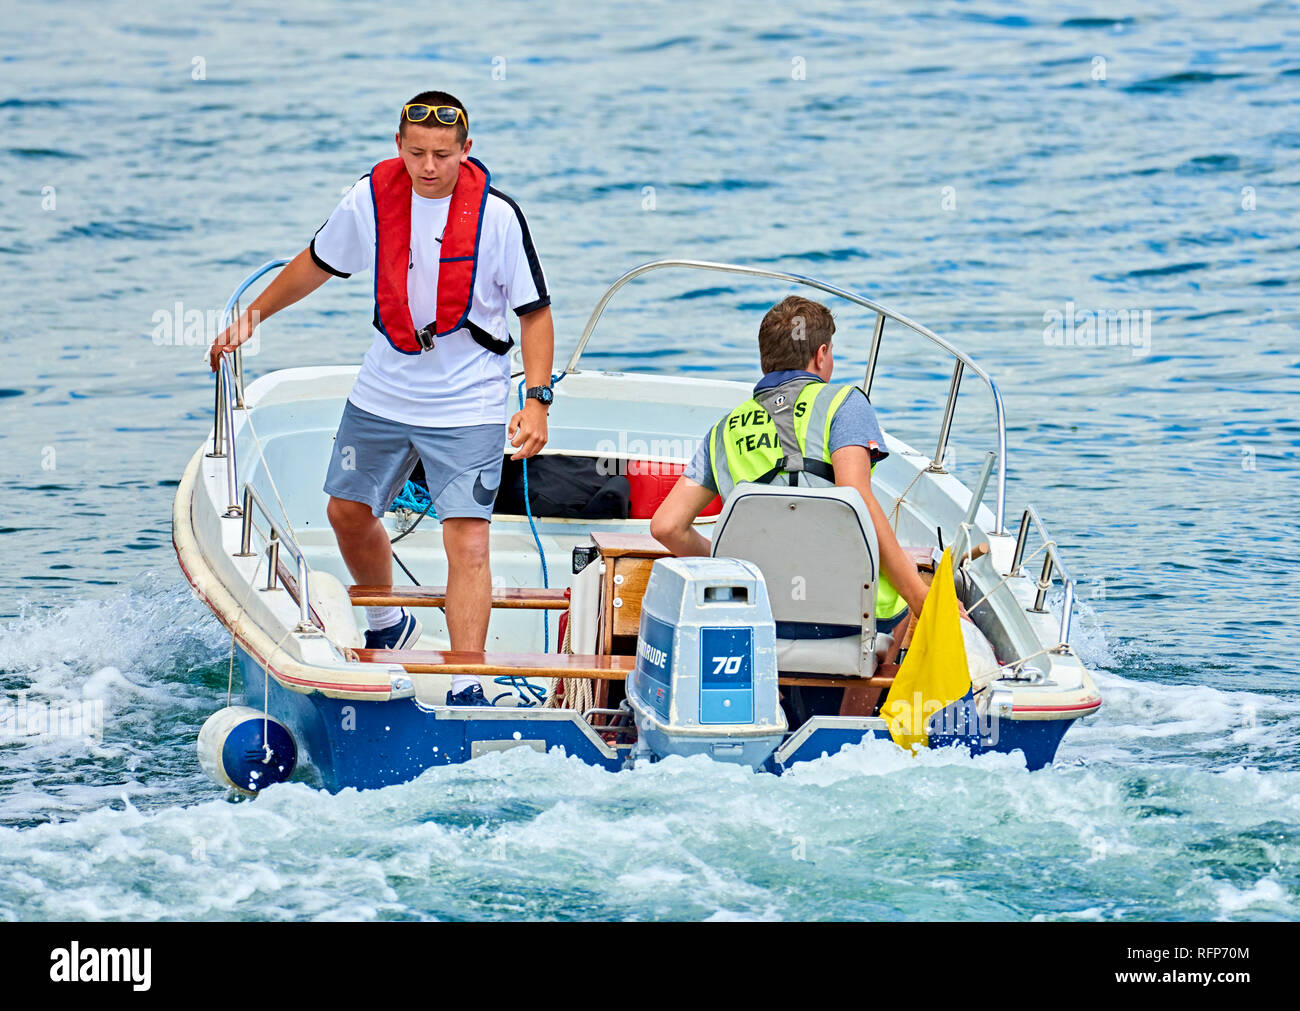 Two young men operate a small safety boat at a waterborne event. Stock Photo